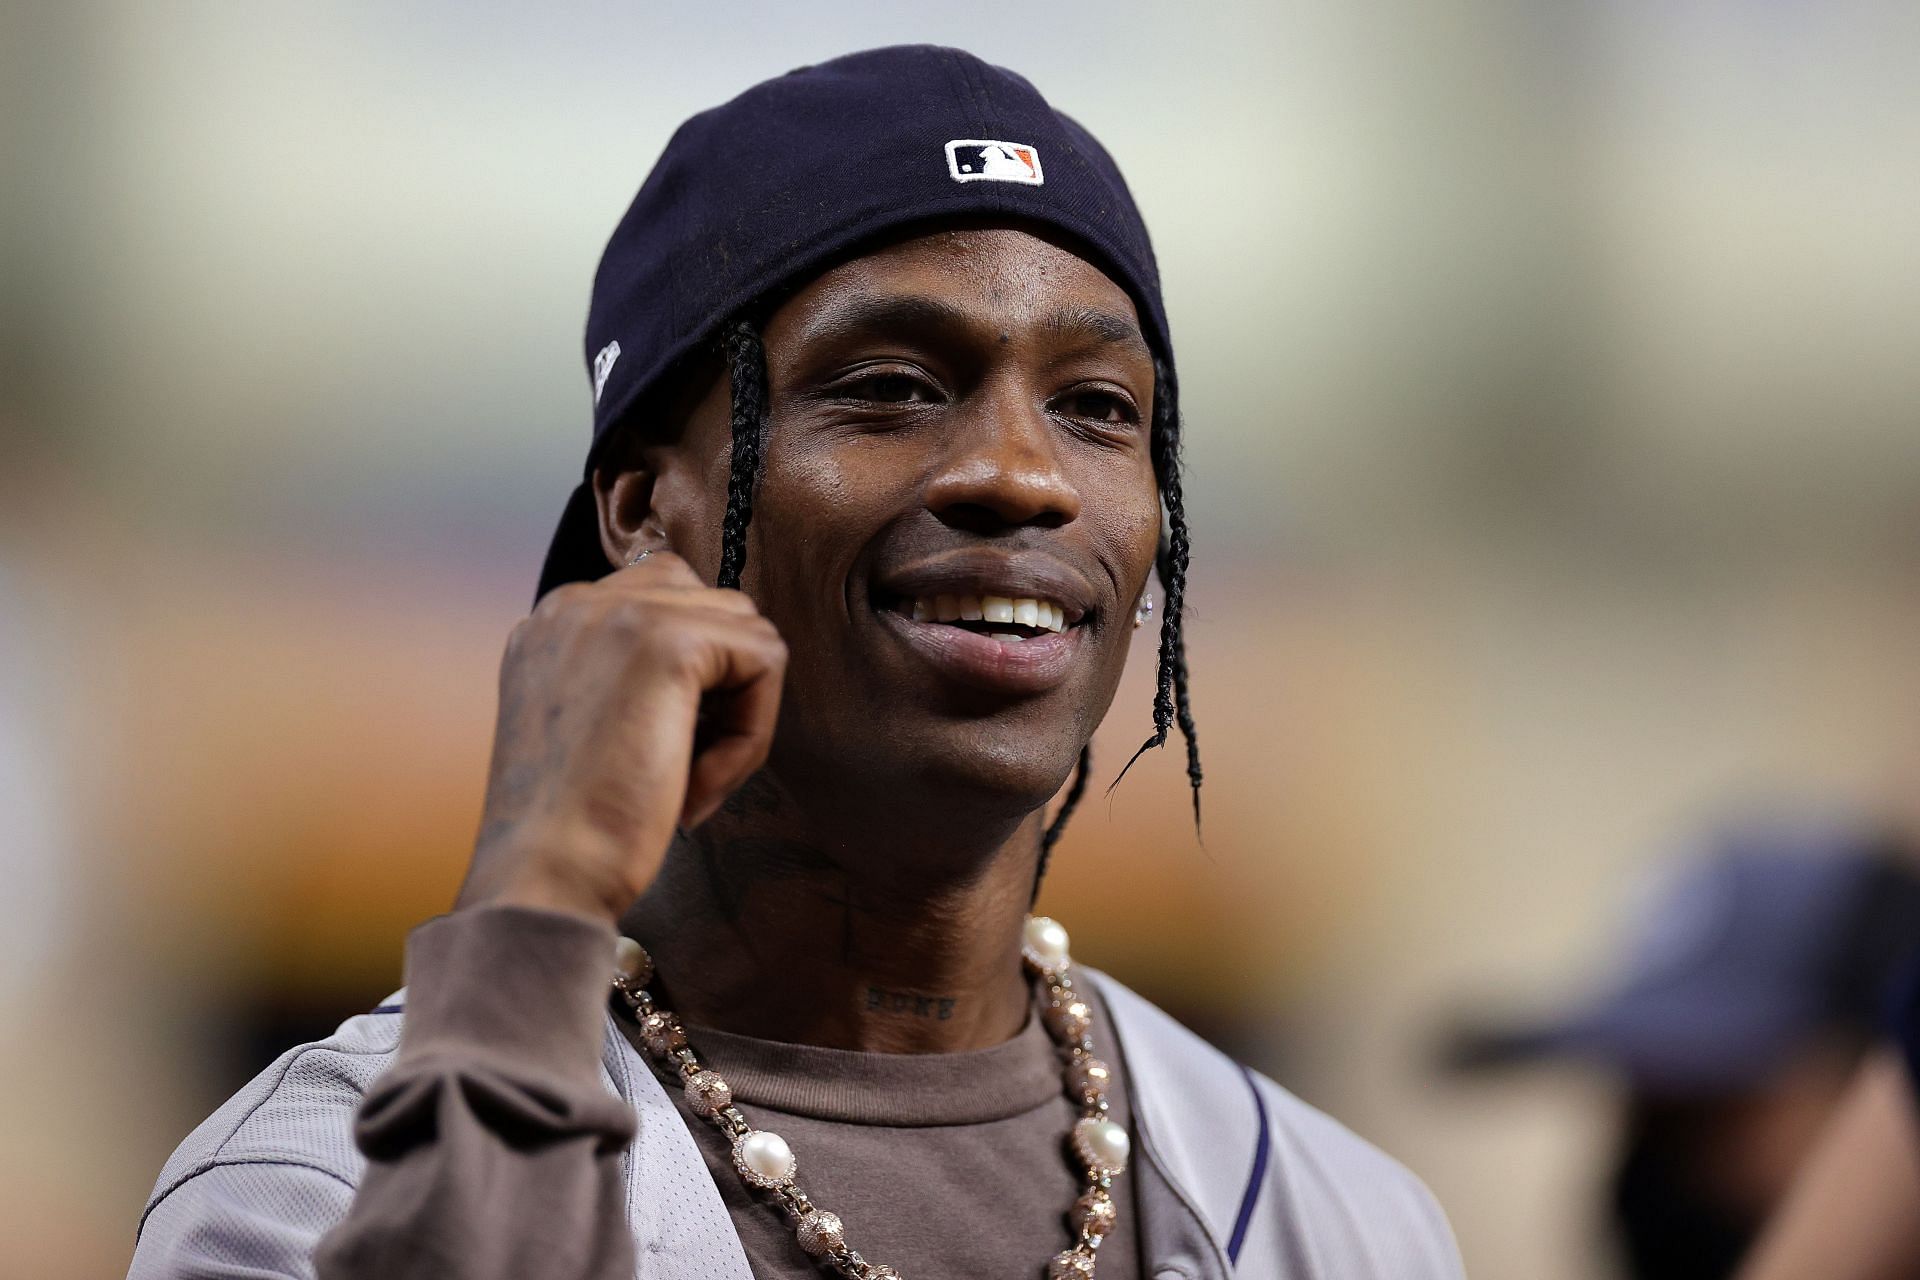 MLB fans clown Travis Scott after rapper plays new album exclusively for  team: Was this their punishment for cheating?